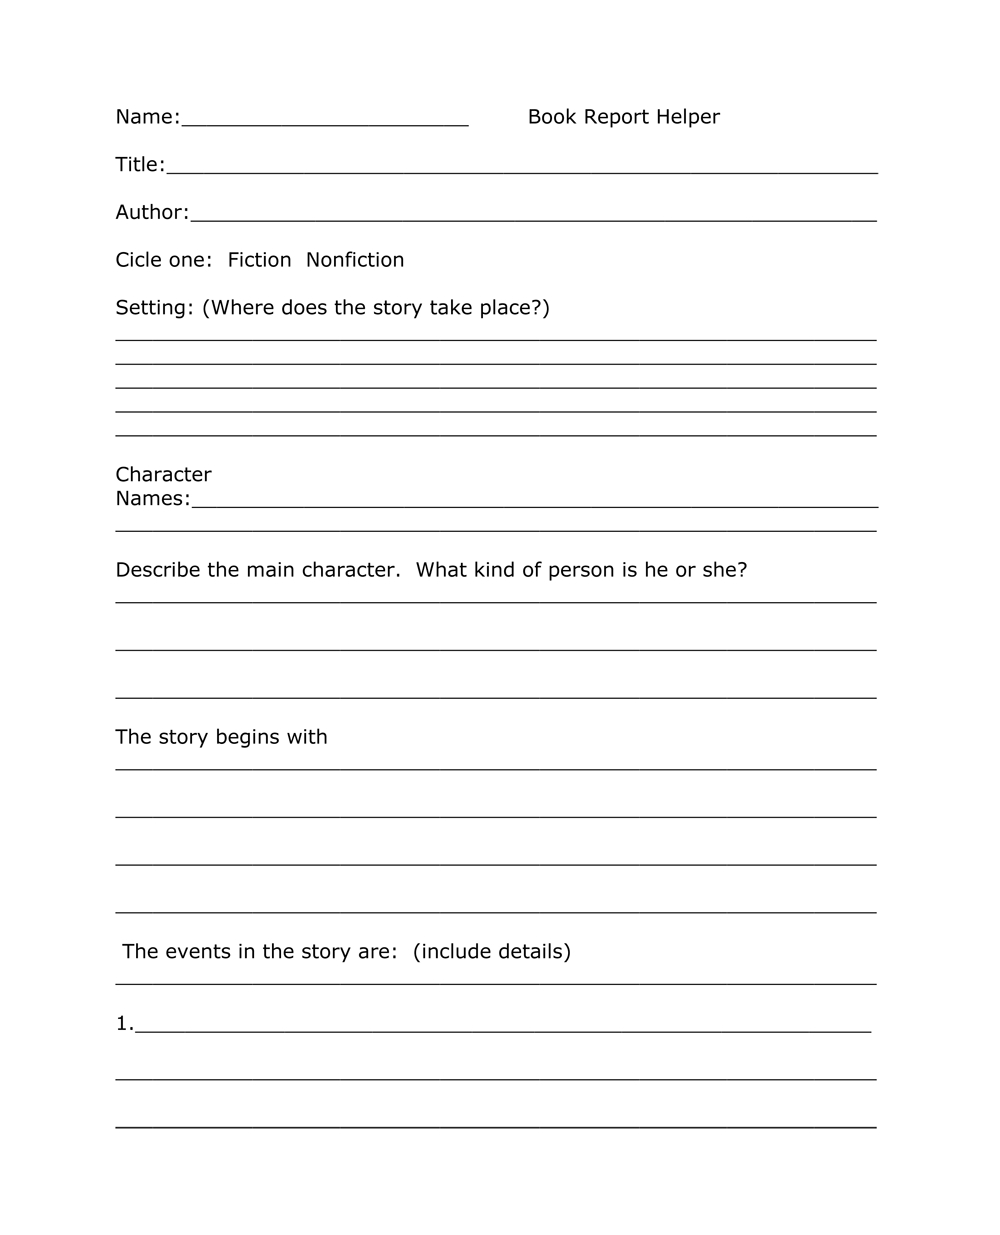 Book Report Templates From Custom Writing Service Intended For One Page Book Report Template